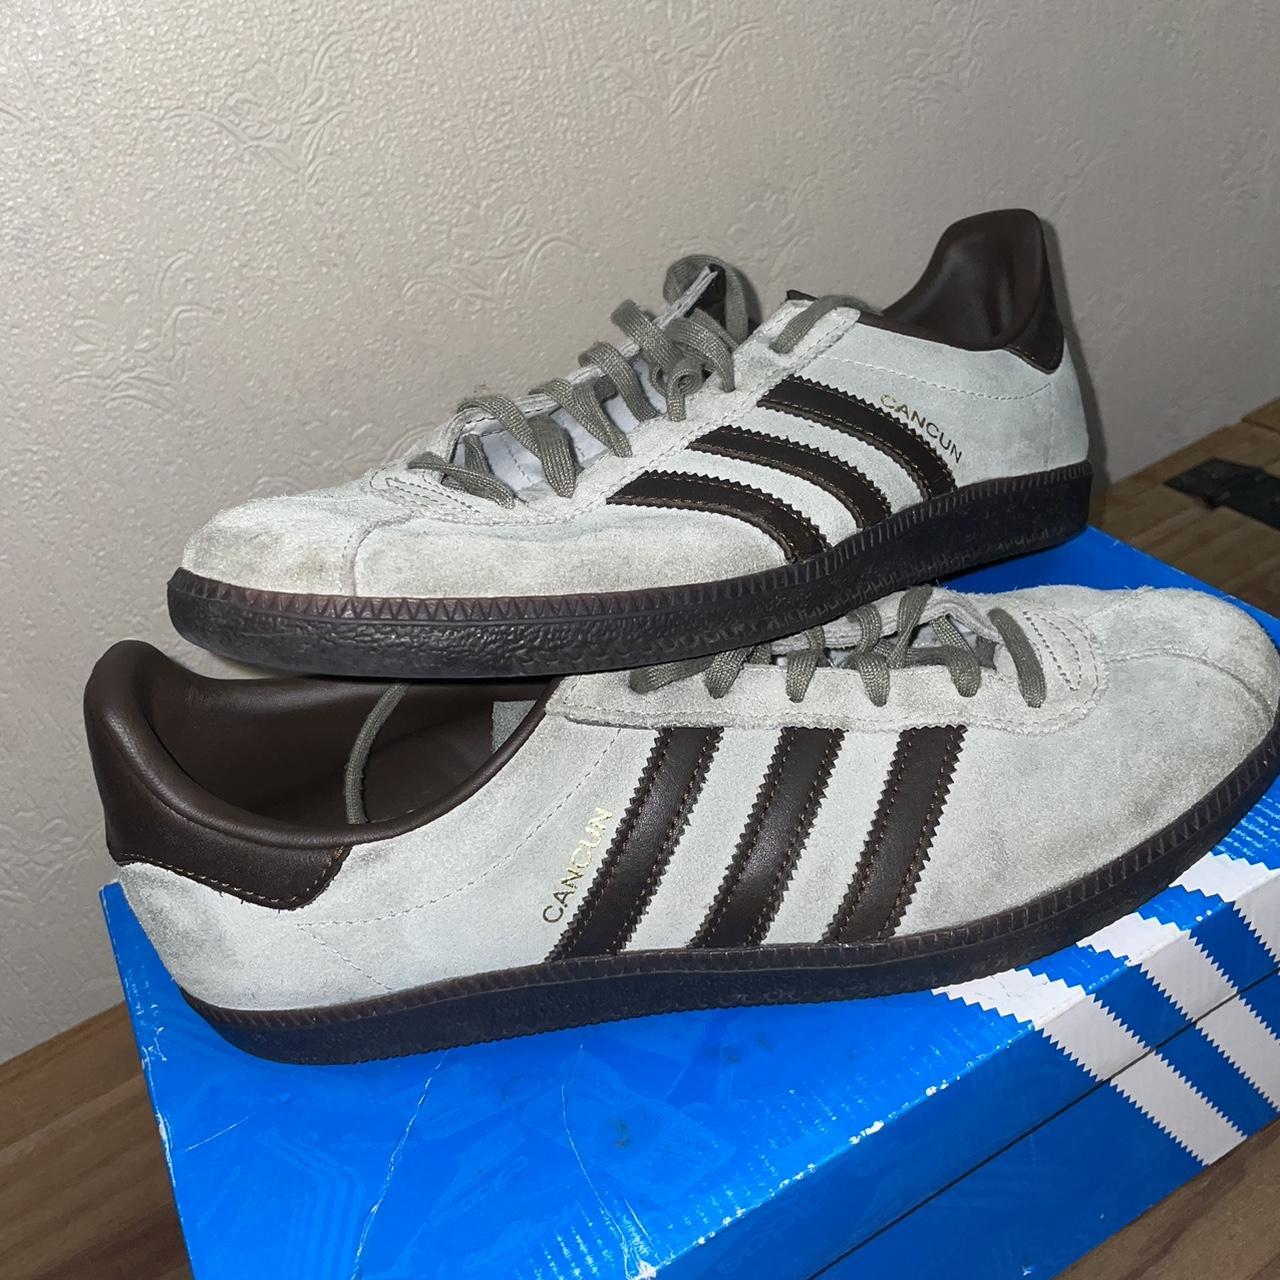 Adidas Cancun (Island Series) Size 8 Perfect for the... - Depop